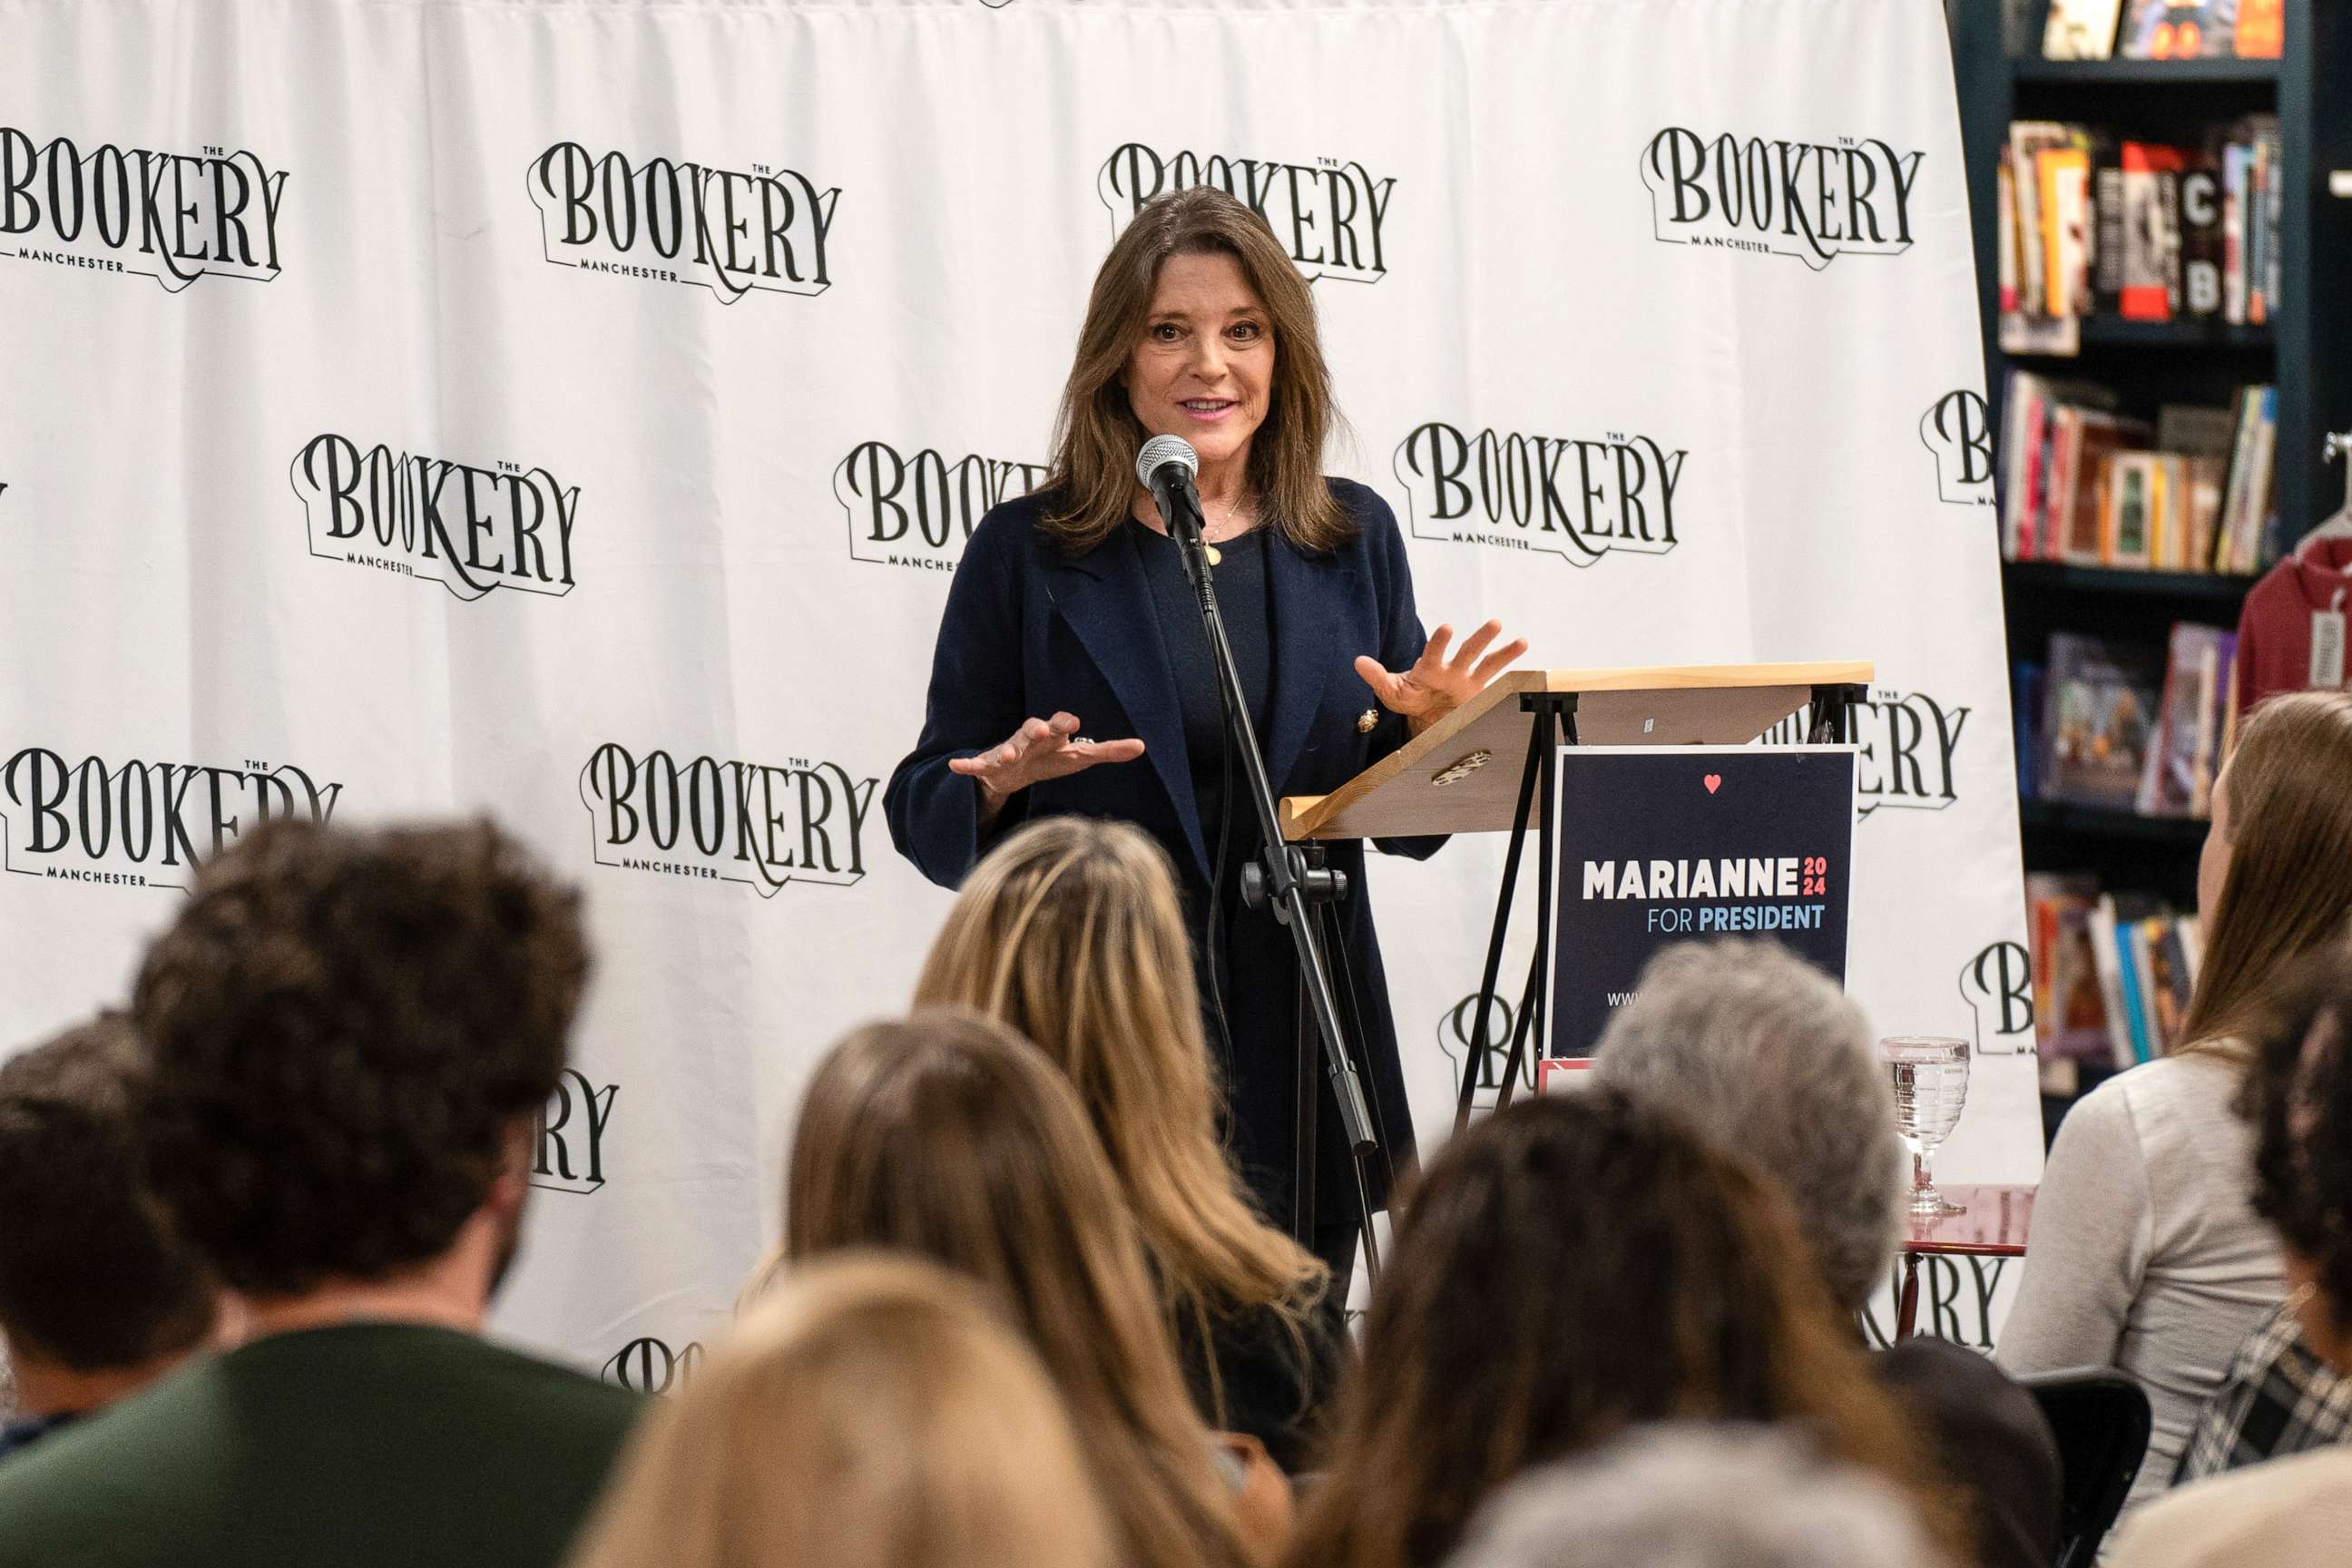 PHOTO: Marianne Williamson discusses her campaign platform with members of the public at Bookery Manchester in Manchester, New Hampshire, March 11, 2023.